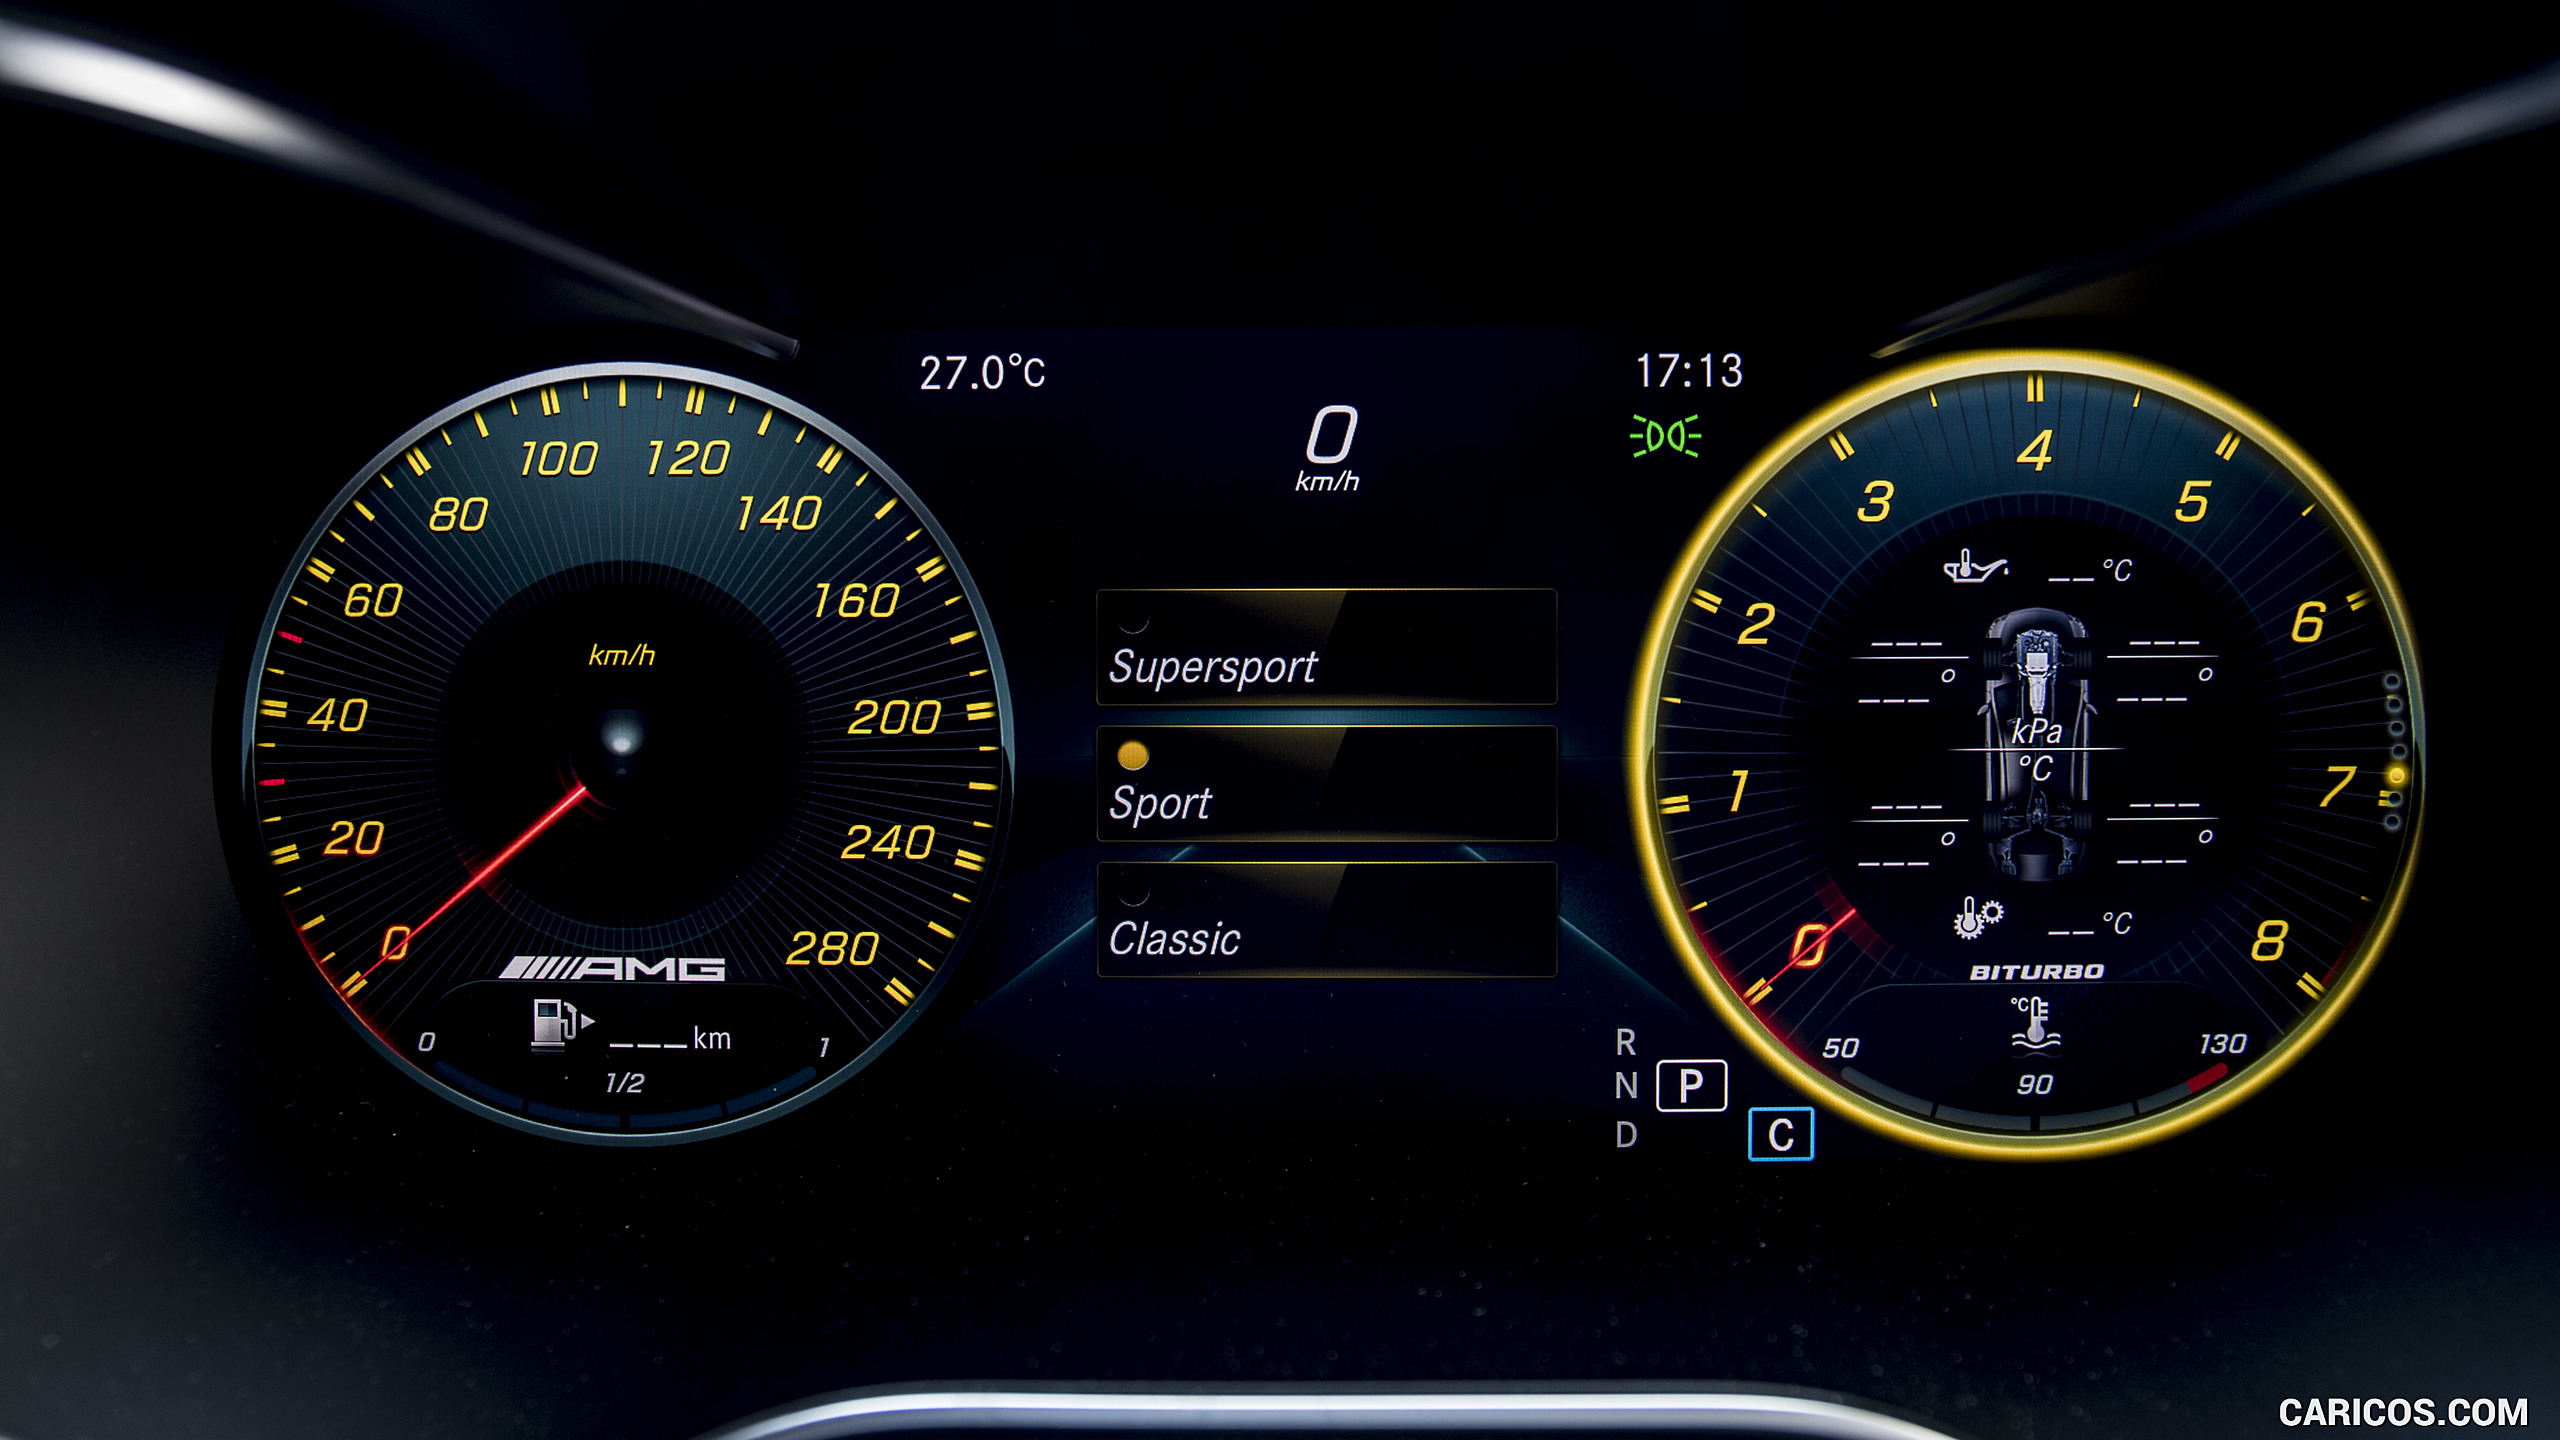 2019 Mercedes-AMG C43 4MATIC Coupe - Digital Instrument Cluster, #102 of 184